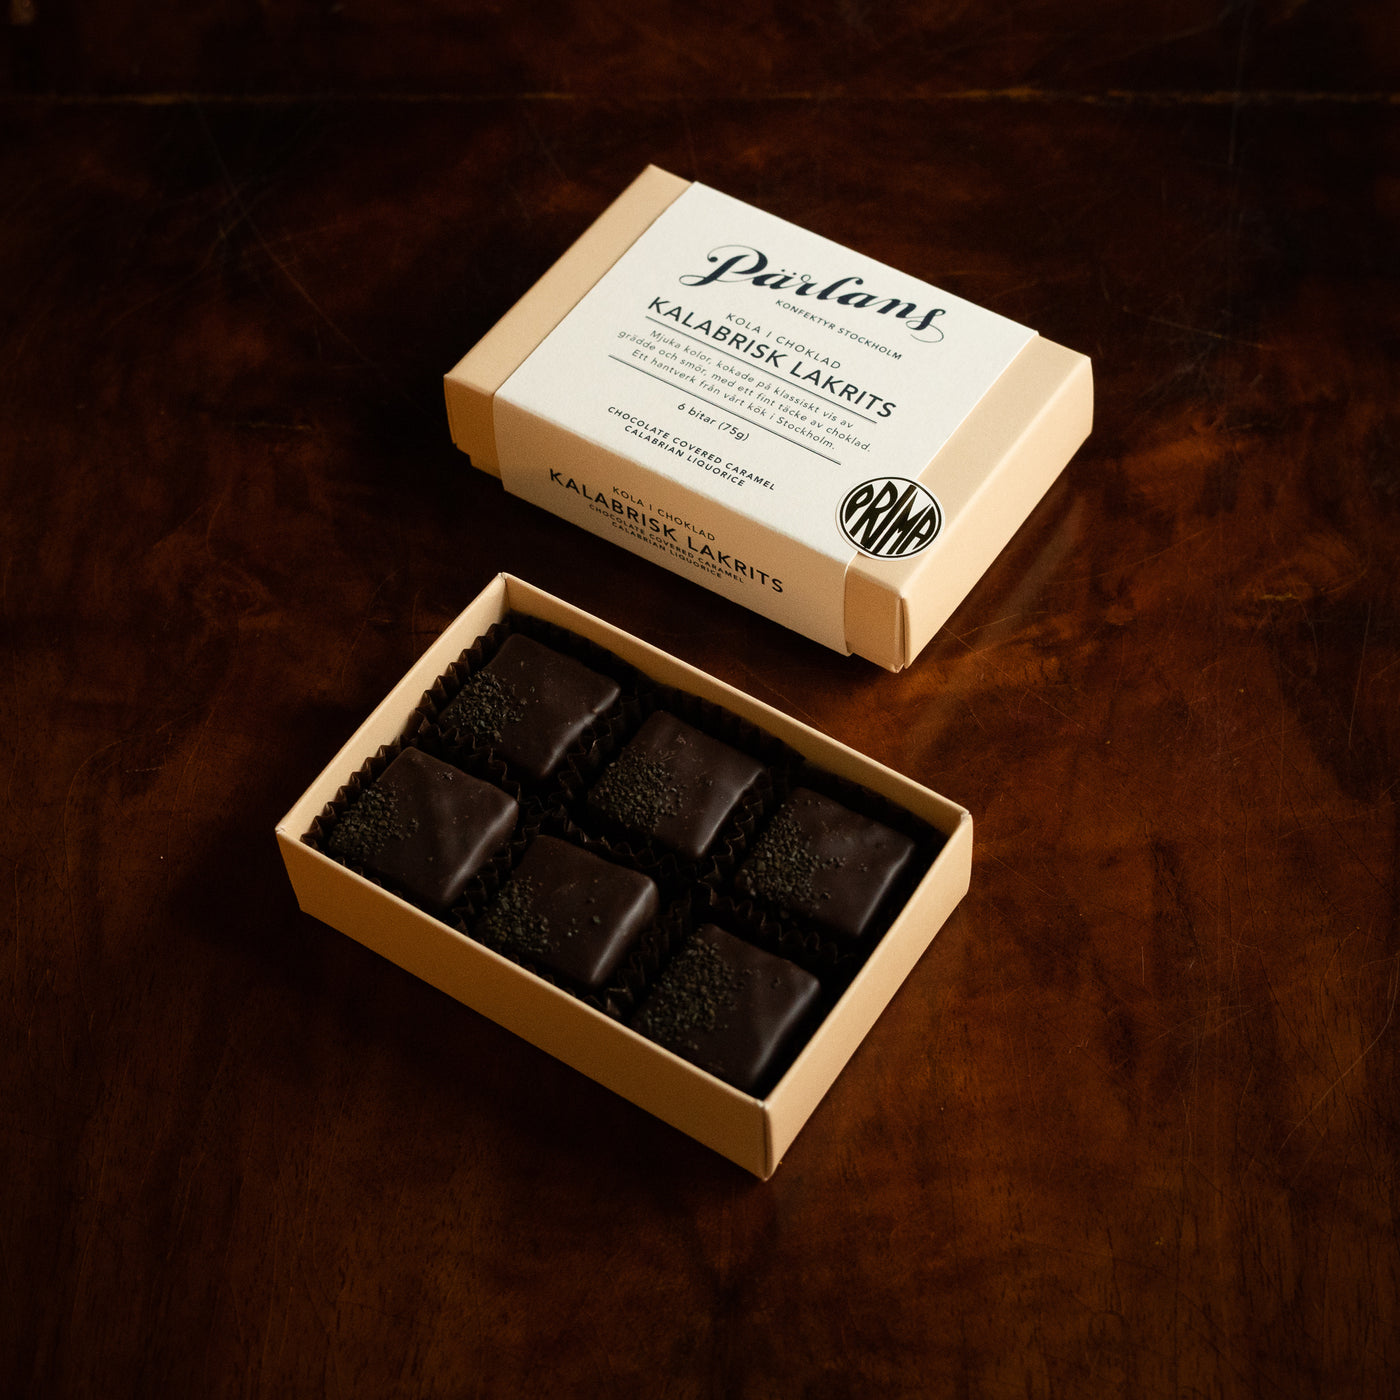 A charming box with six pieces of your favourite chocolate covered caramel. Treat yourself or someone you love! <br><br>CALABRIAN LIQUORICE – A rich caramel with the sweet taste of Italian liquorice and a pinch of sea salt. Dipped in dark chocolate, with a touch of liquorice crunch on the top. This dark treasure is pure perfection!